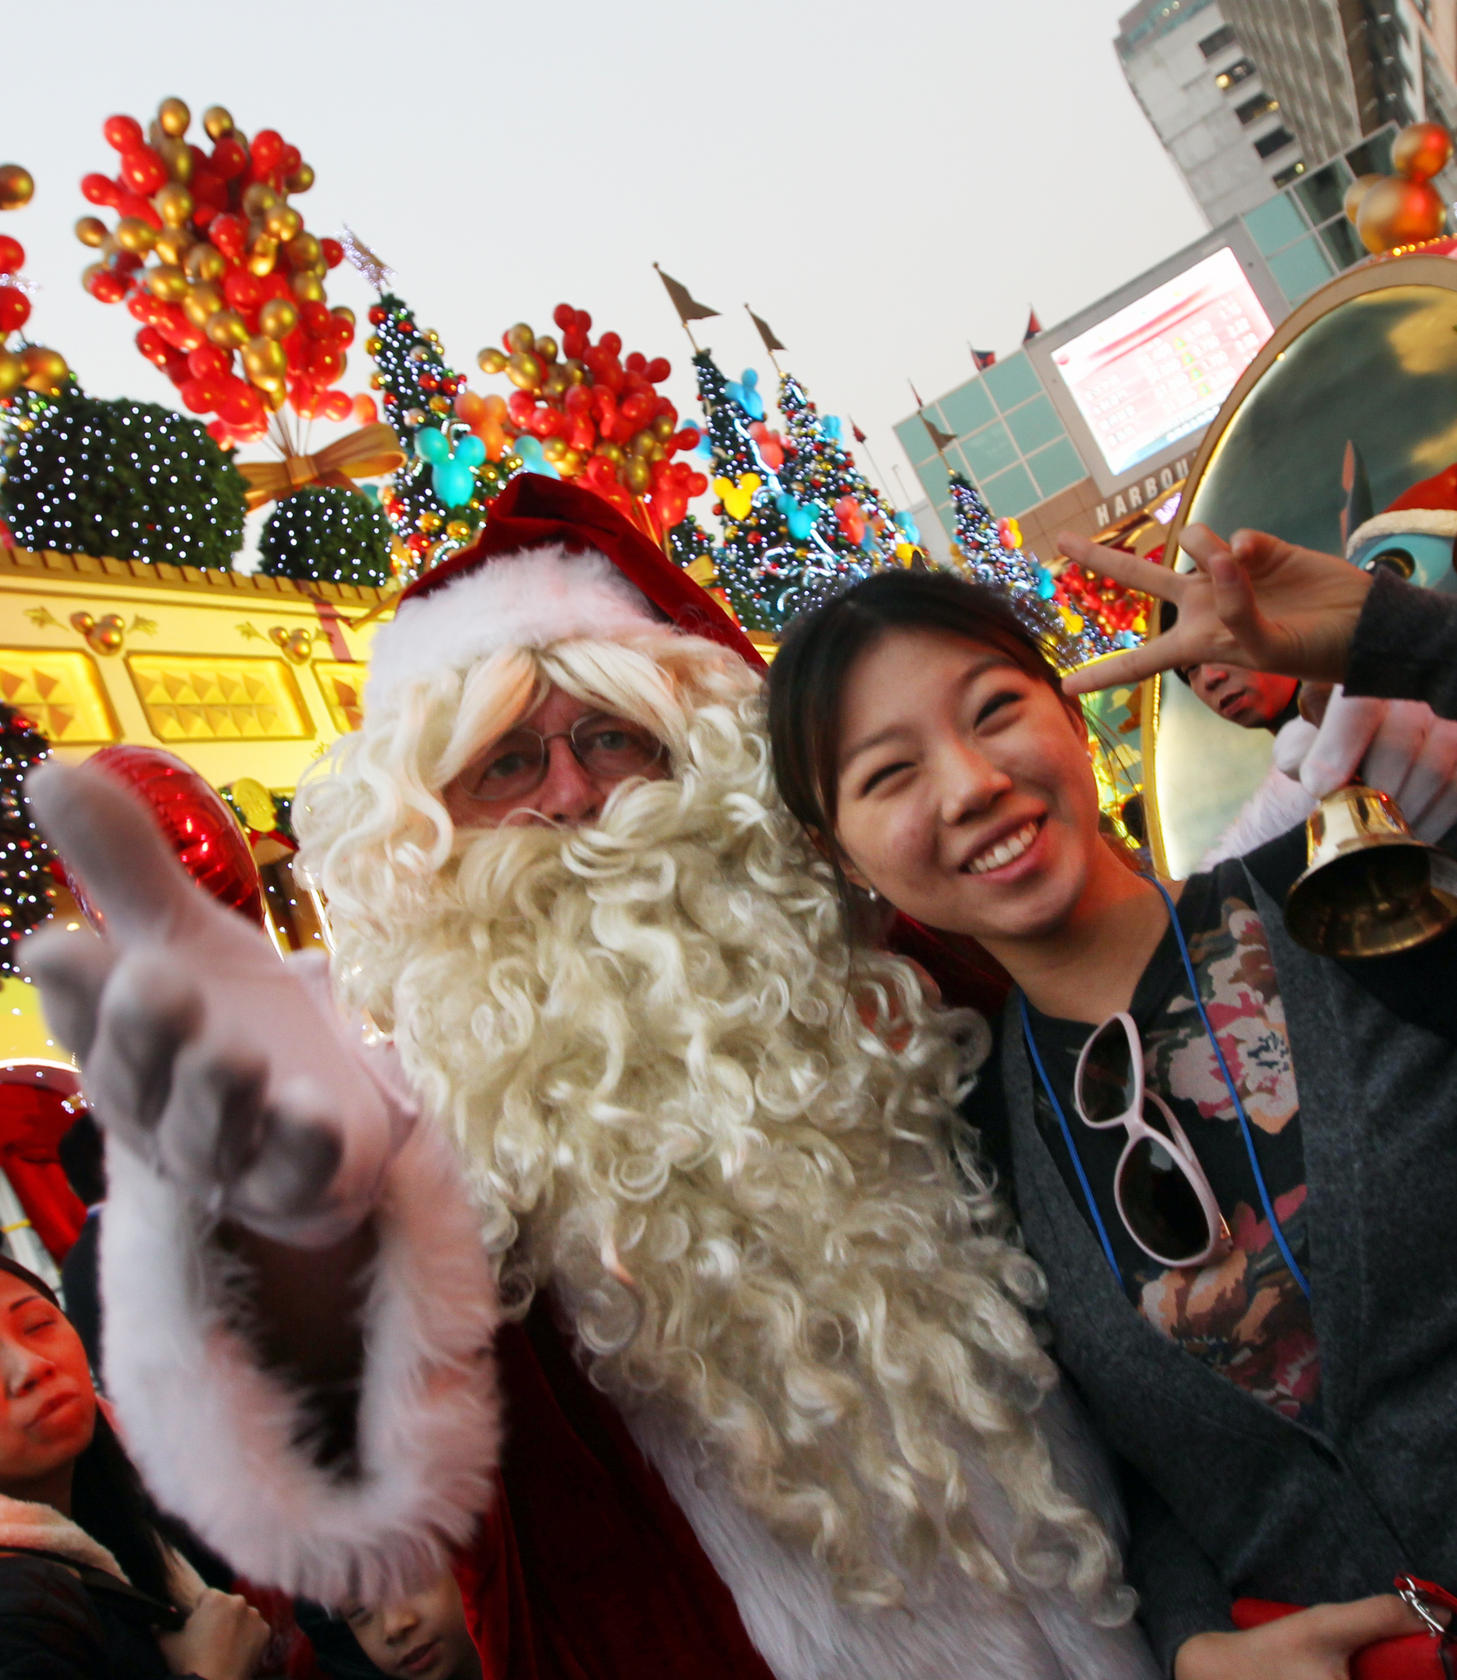 Santa took some time out to pose for photographs at Harbour City in Tsim Sha Tsui yesterday. Malls, theme parks and the Cultural Centre are the focus of attention for the holiday period. Photo: Felix Wong